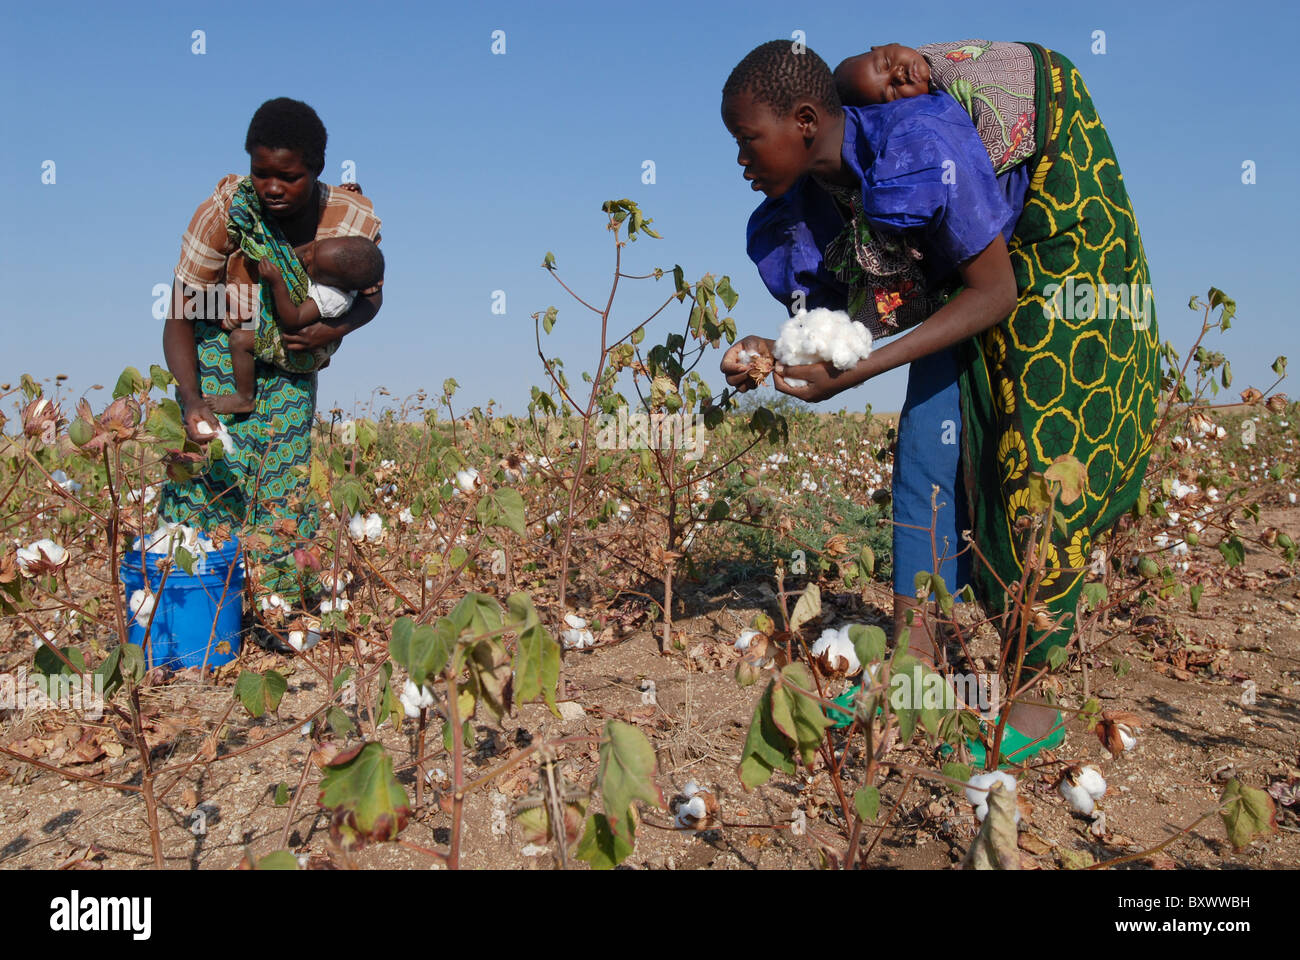 Africa TANZANIA  organic cotton project biore in Meatu district , women pick cotton by hand carrying her infant on the back Stock Photo